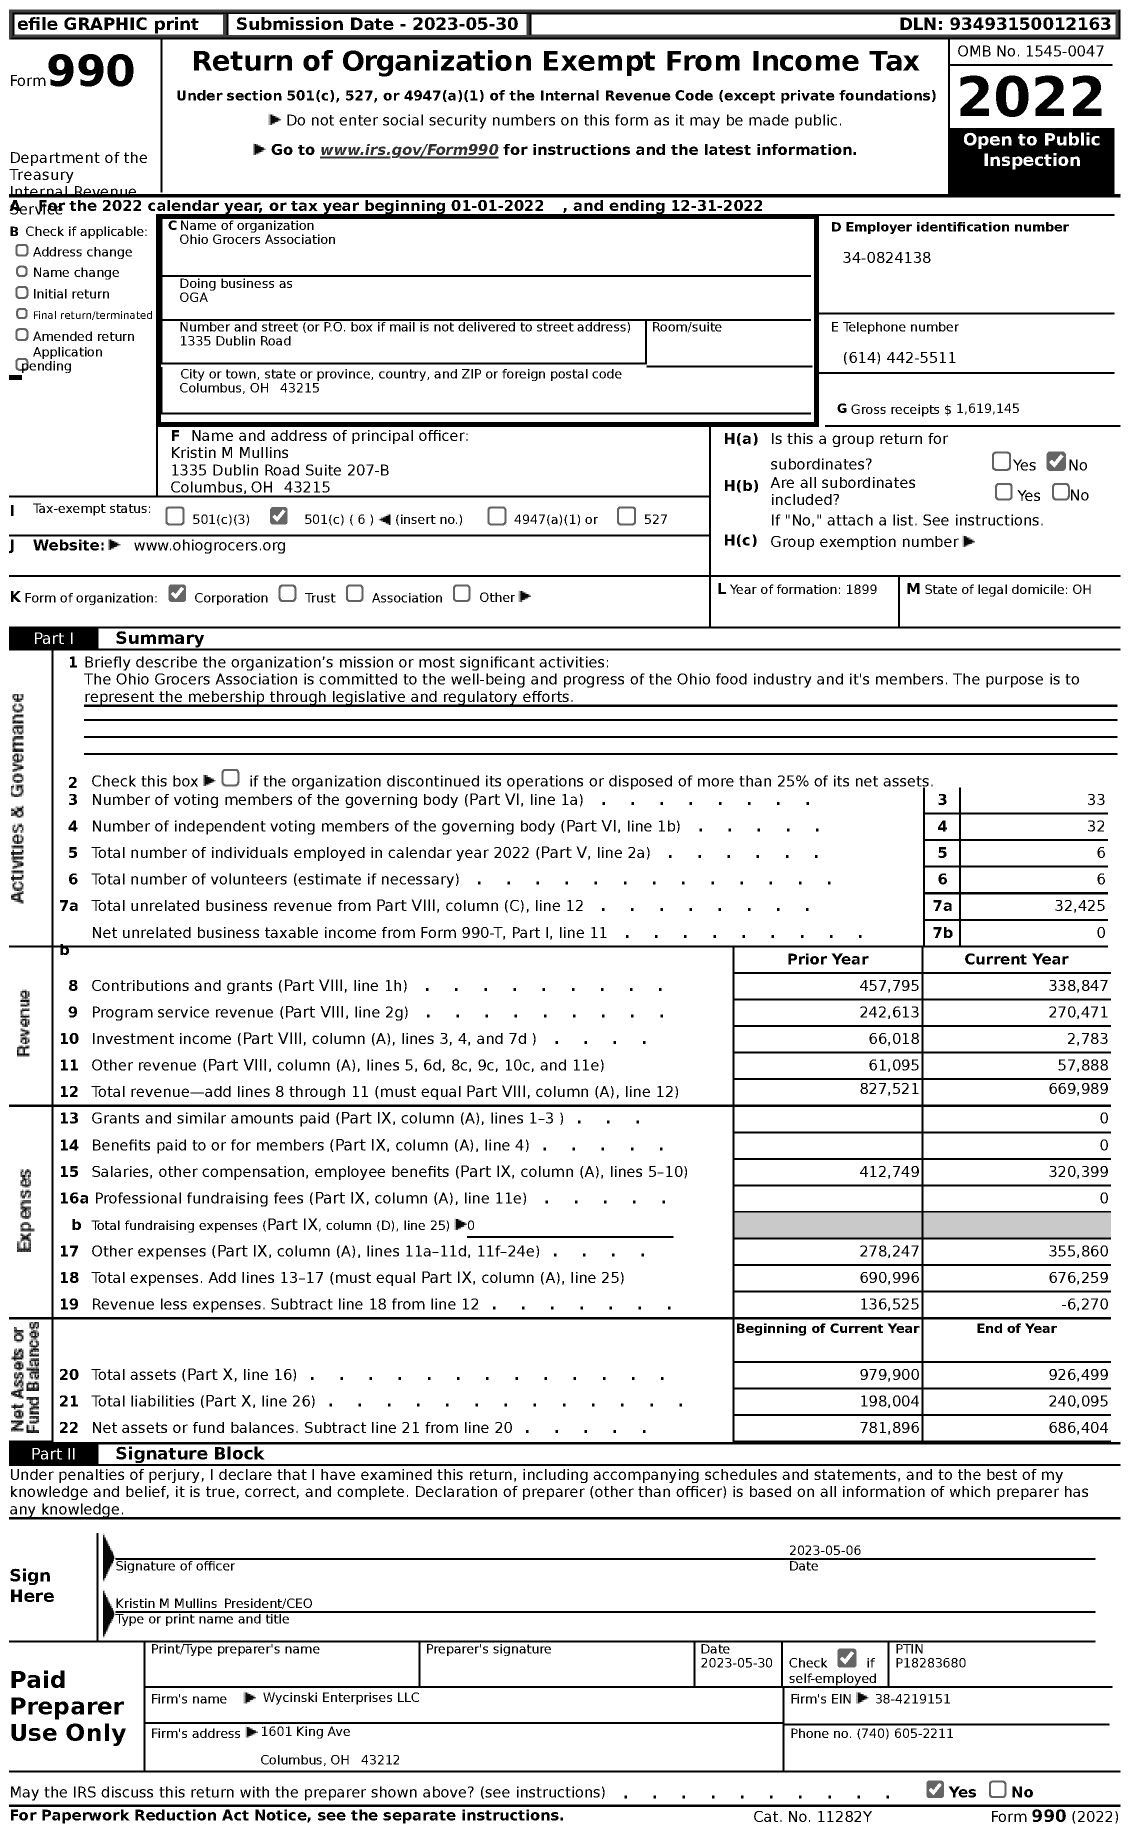 Image of first page of 2022 Form 990 for Ohio Grocers Association (OGA)